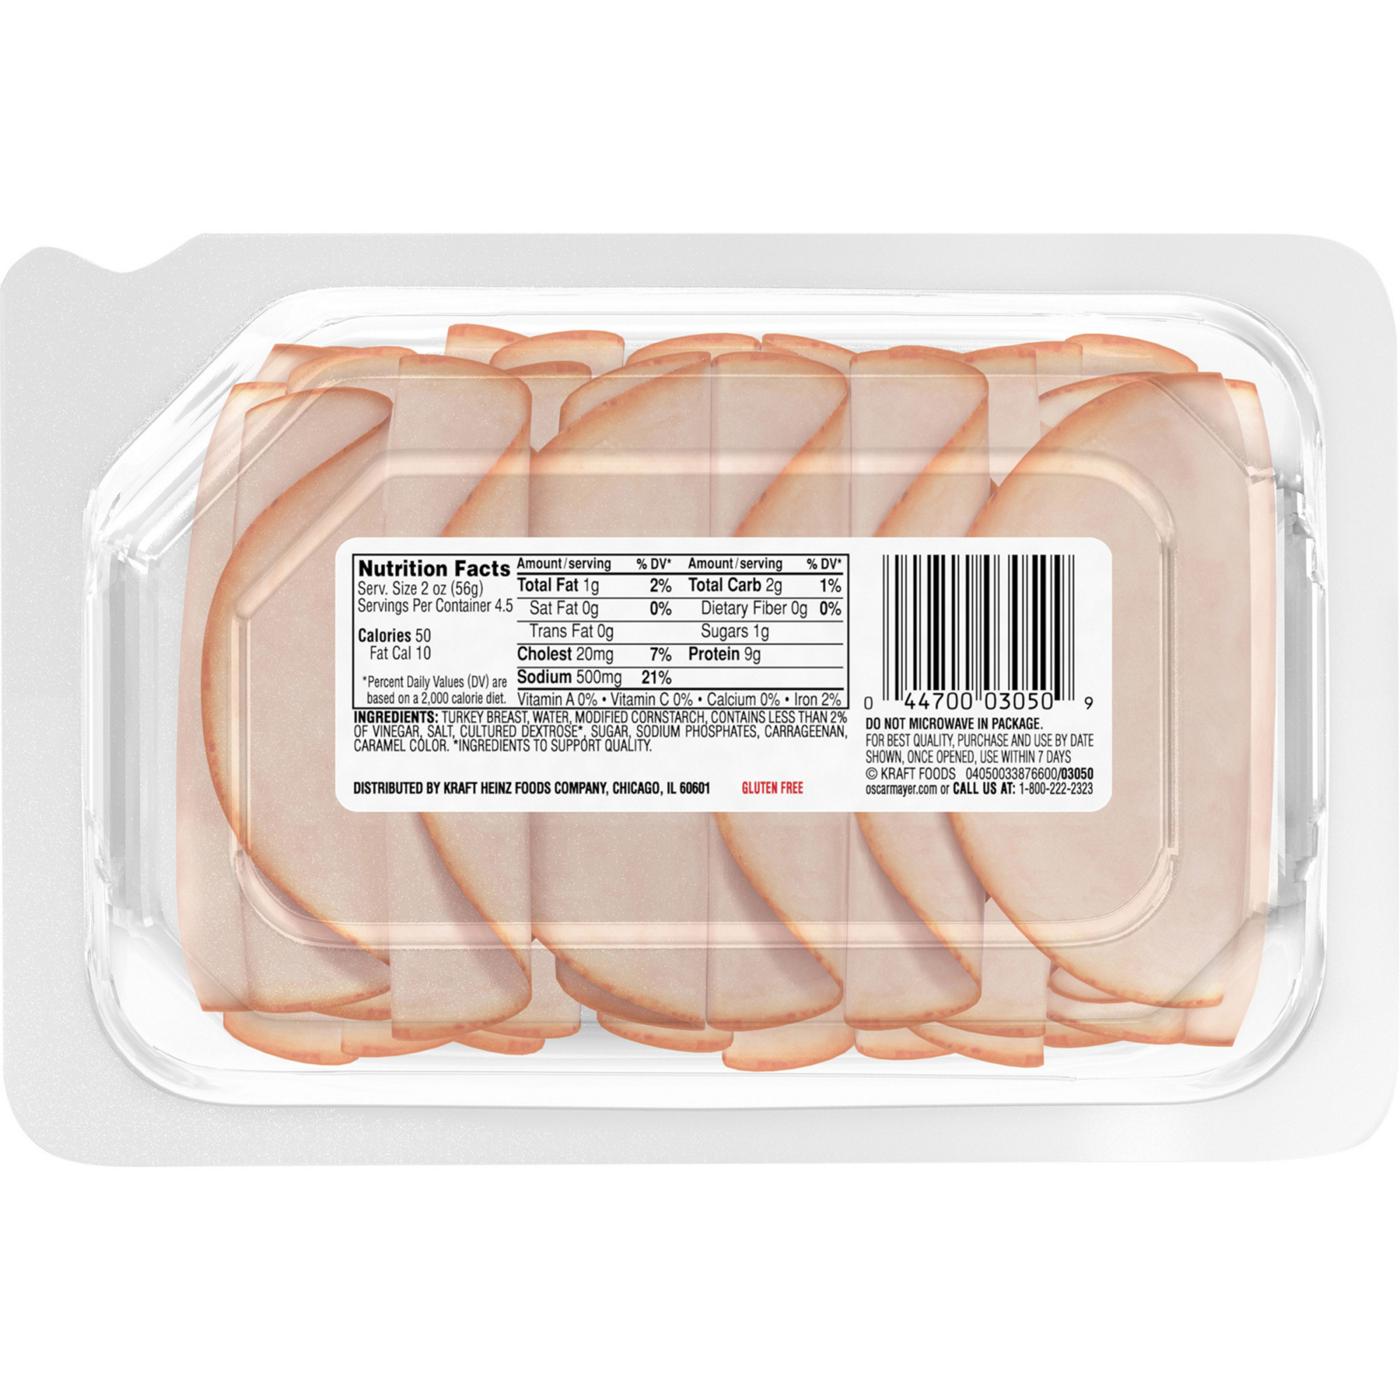 Oscar Mayer Deli Fresh Oven Roasted Sliced Turkey Breast Lunch Meat; image 2 of 3